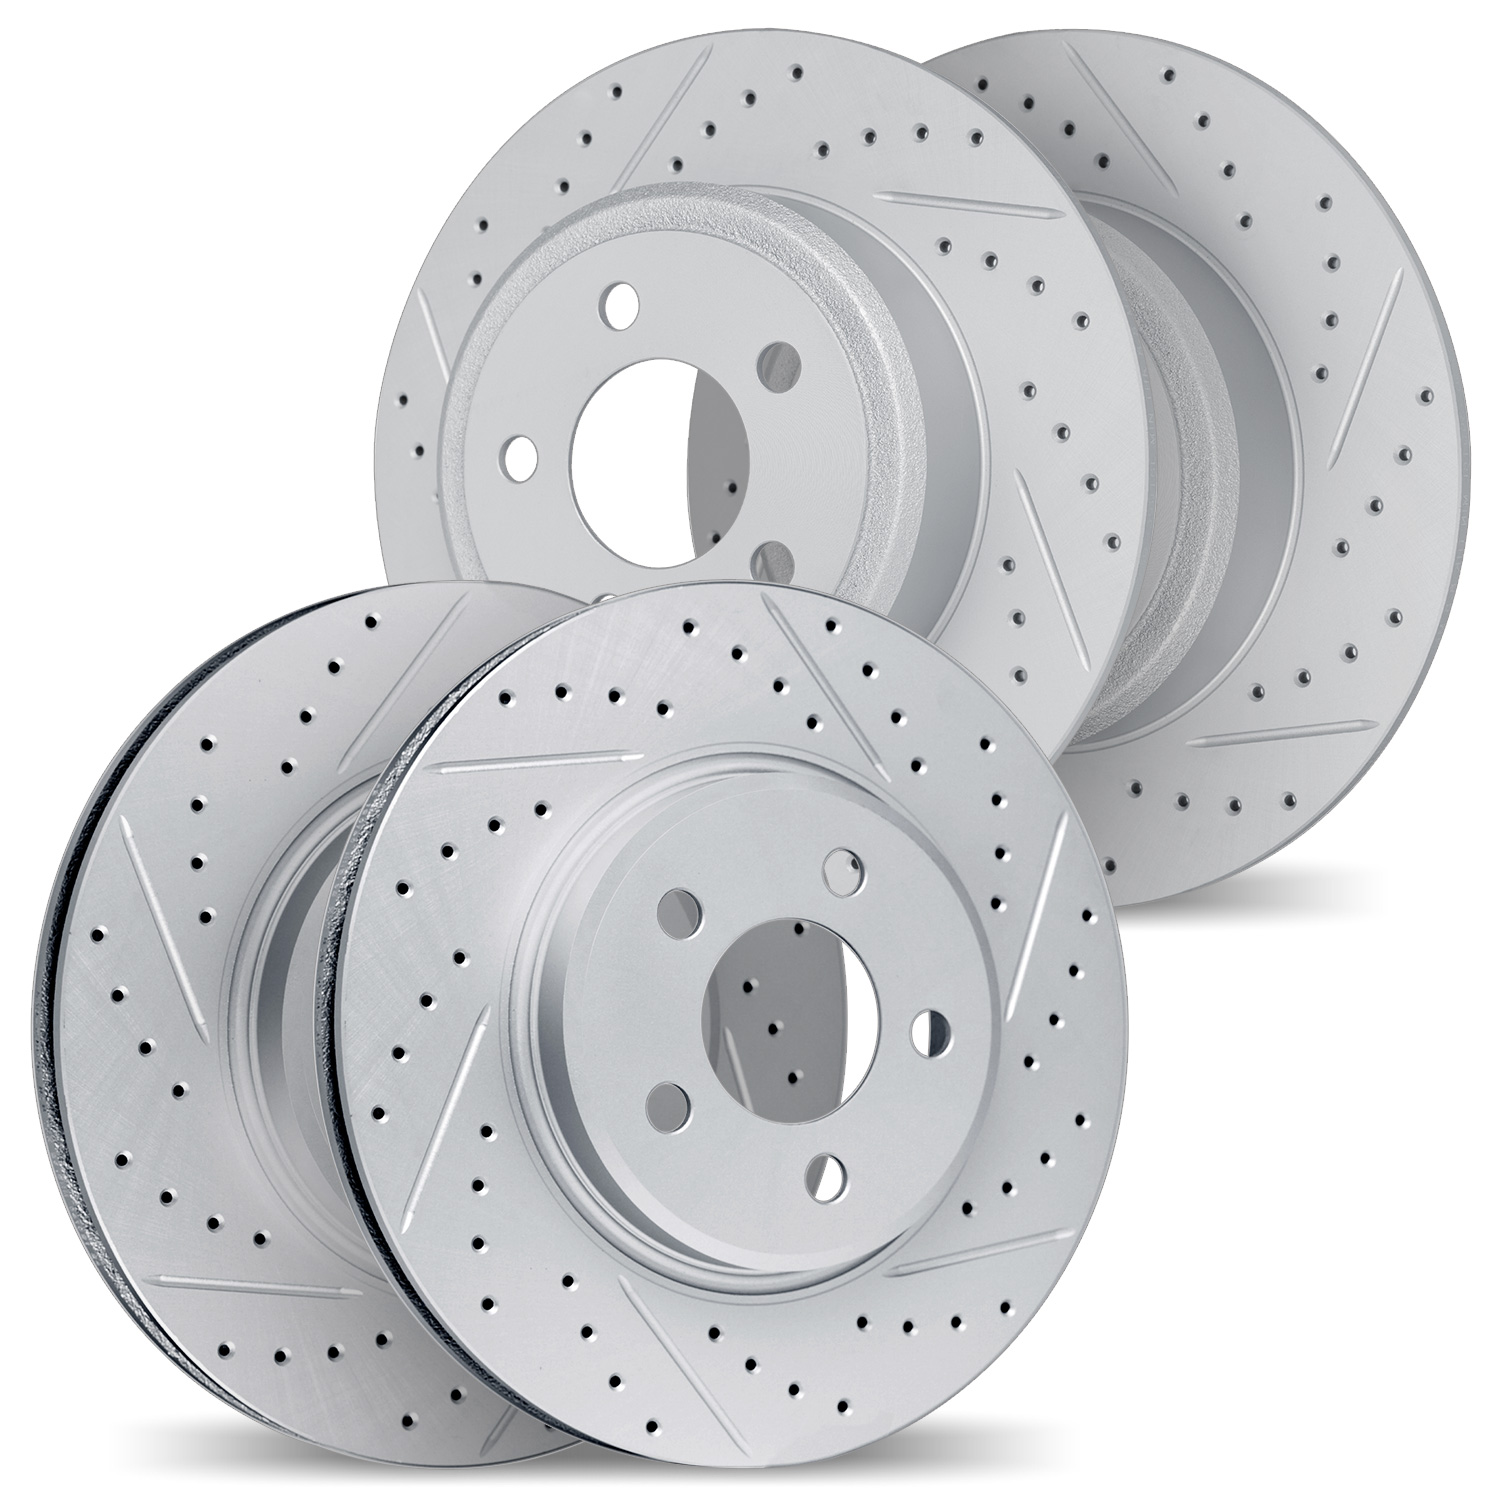 2004-03044 Geoperformance Drilled/Slotted Brake Rotors, 2015-2020 Kia/Hyundai/Genesis, Position: Front and Rear